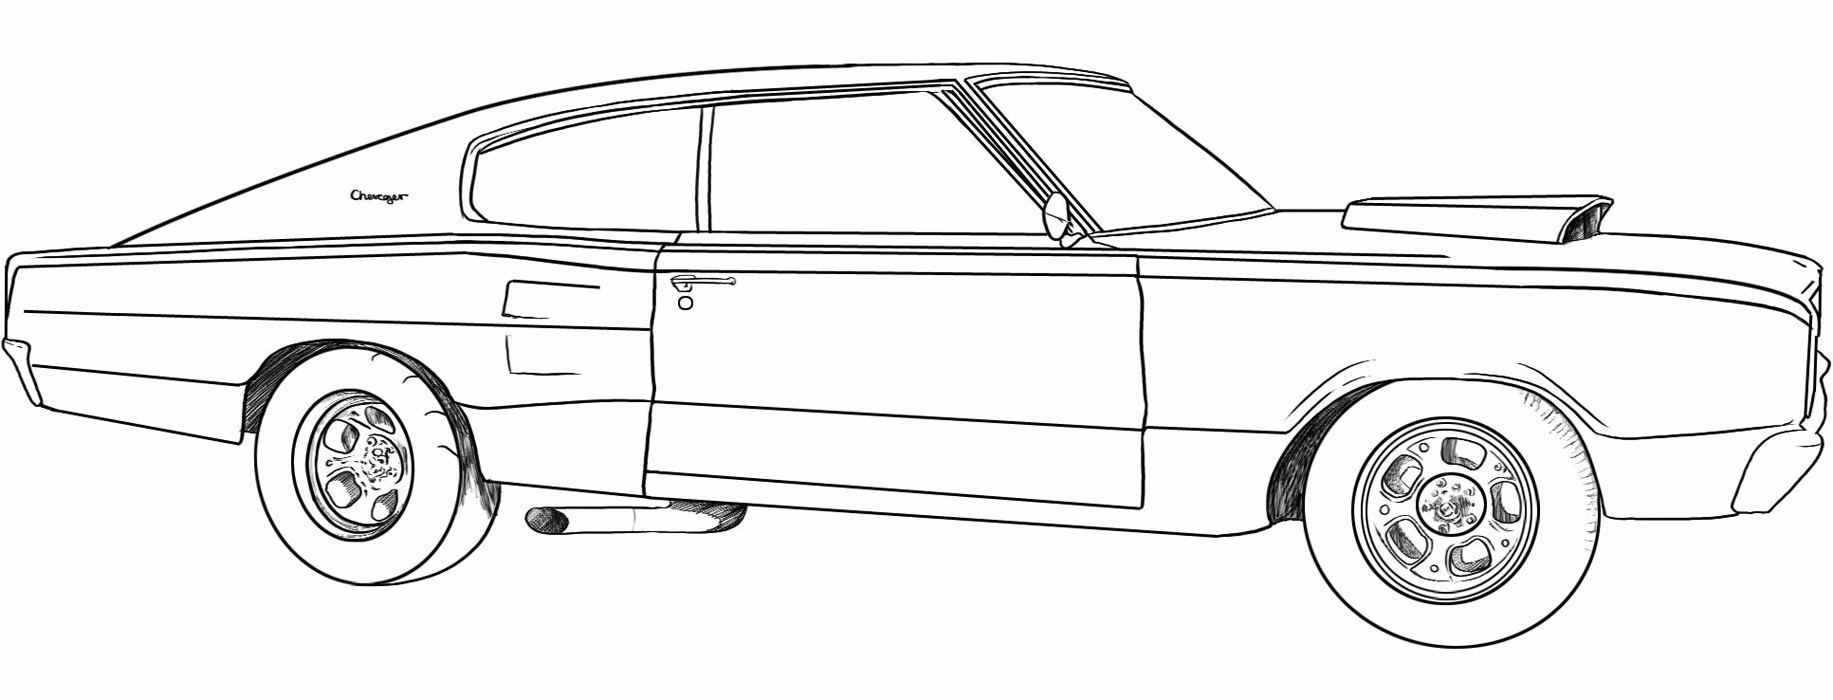 Chevy Cars Coloring Pages Printable - Coloring Pages For All Ages